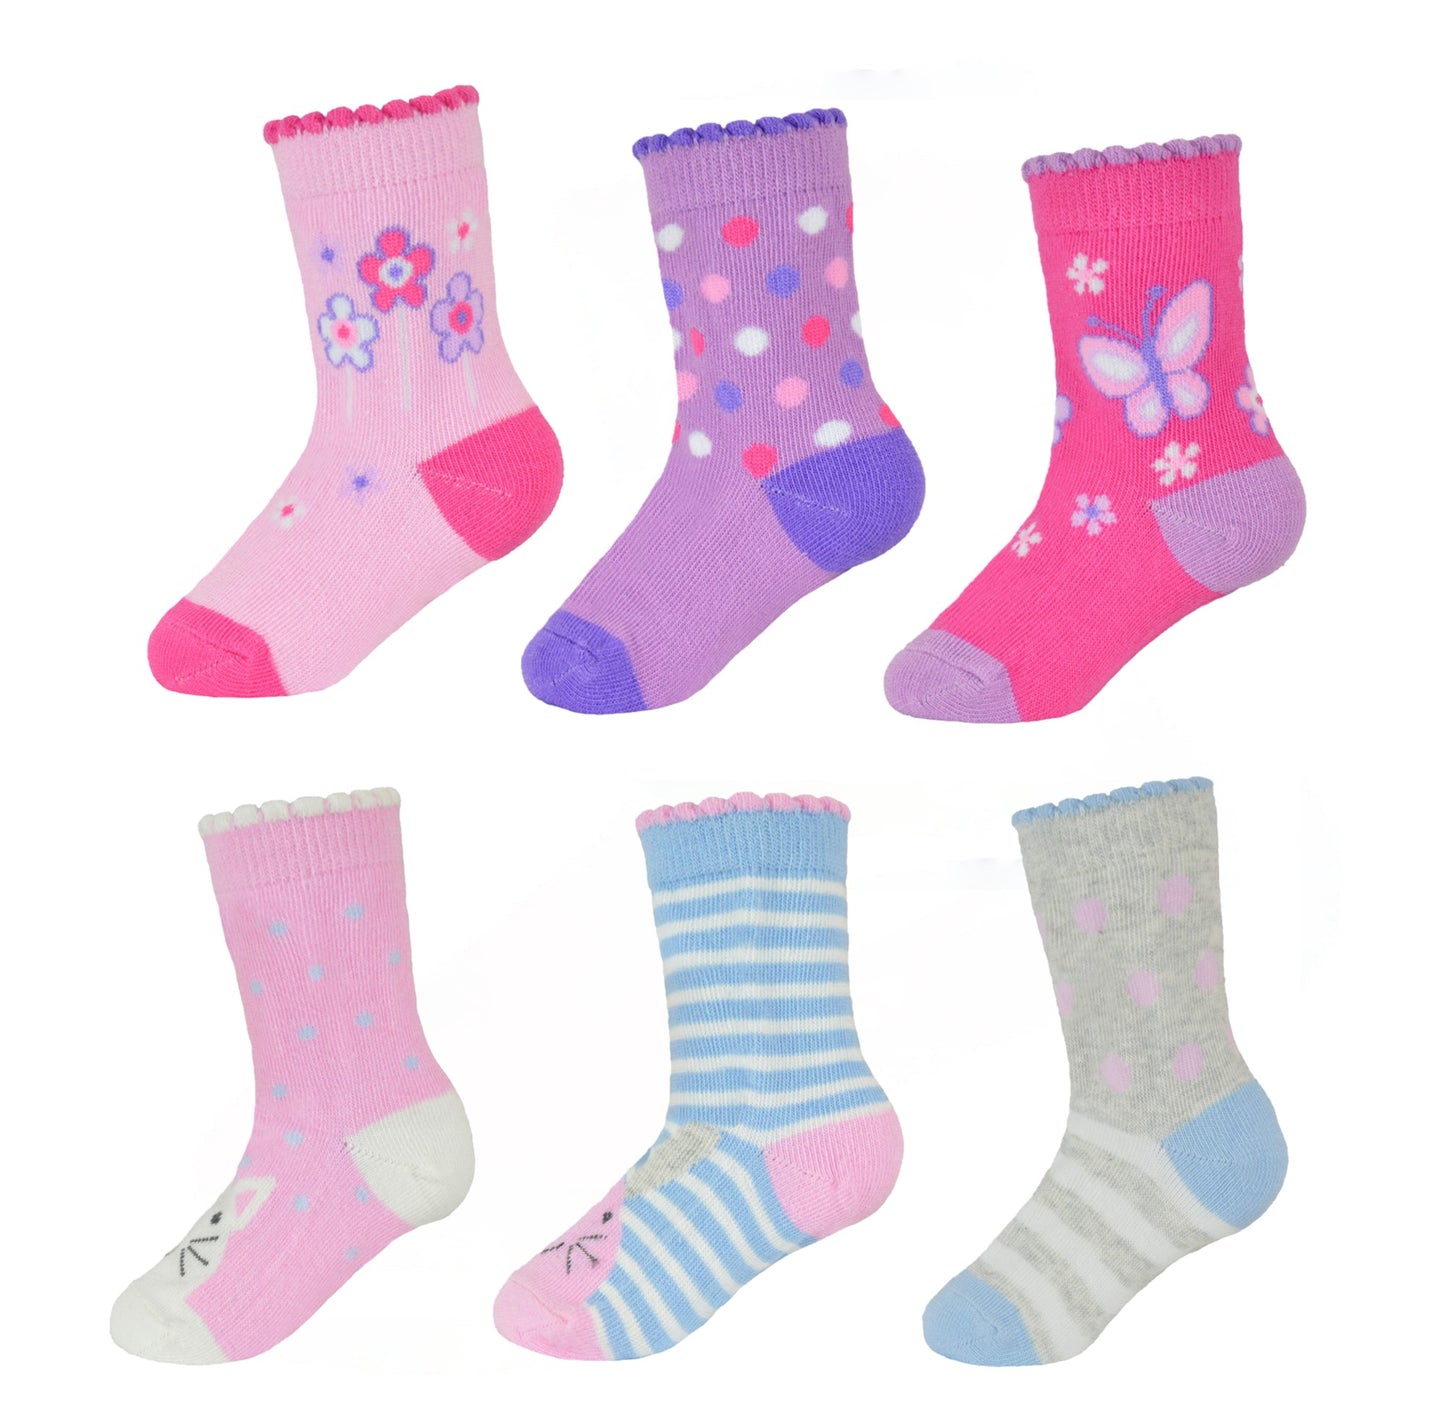 6 Pairs Baby Toddler Girls' Cute Patterned Cotton Rich Socks